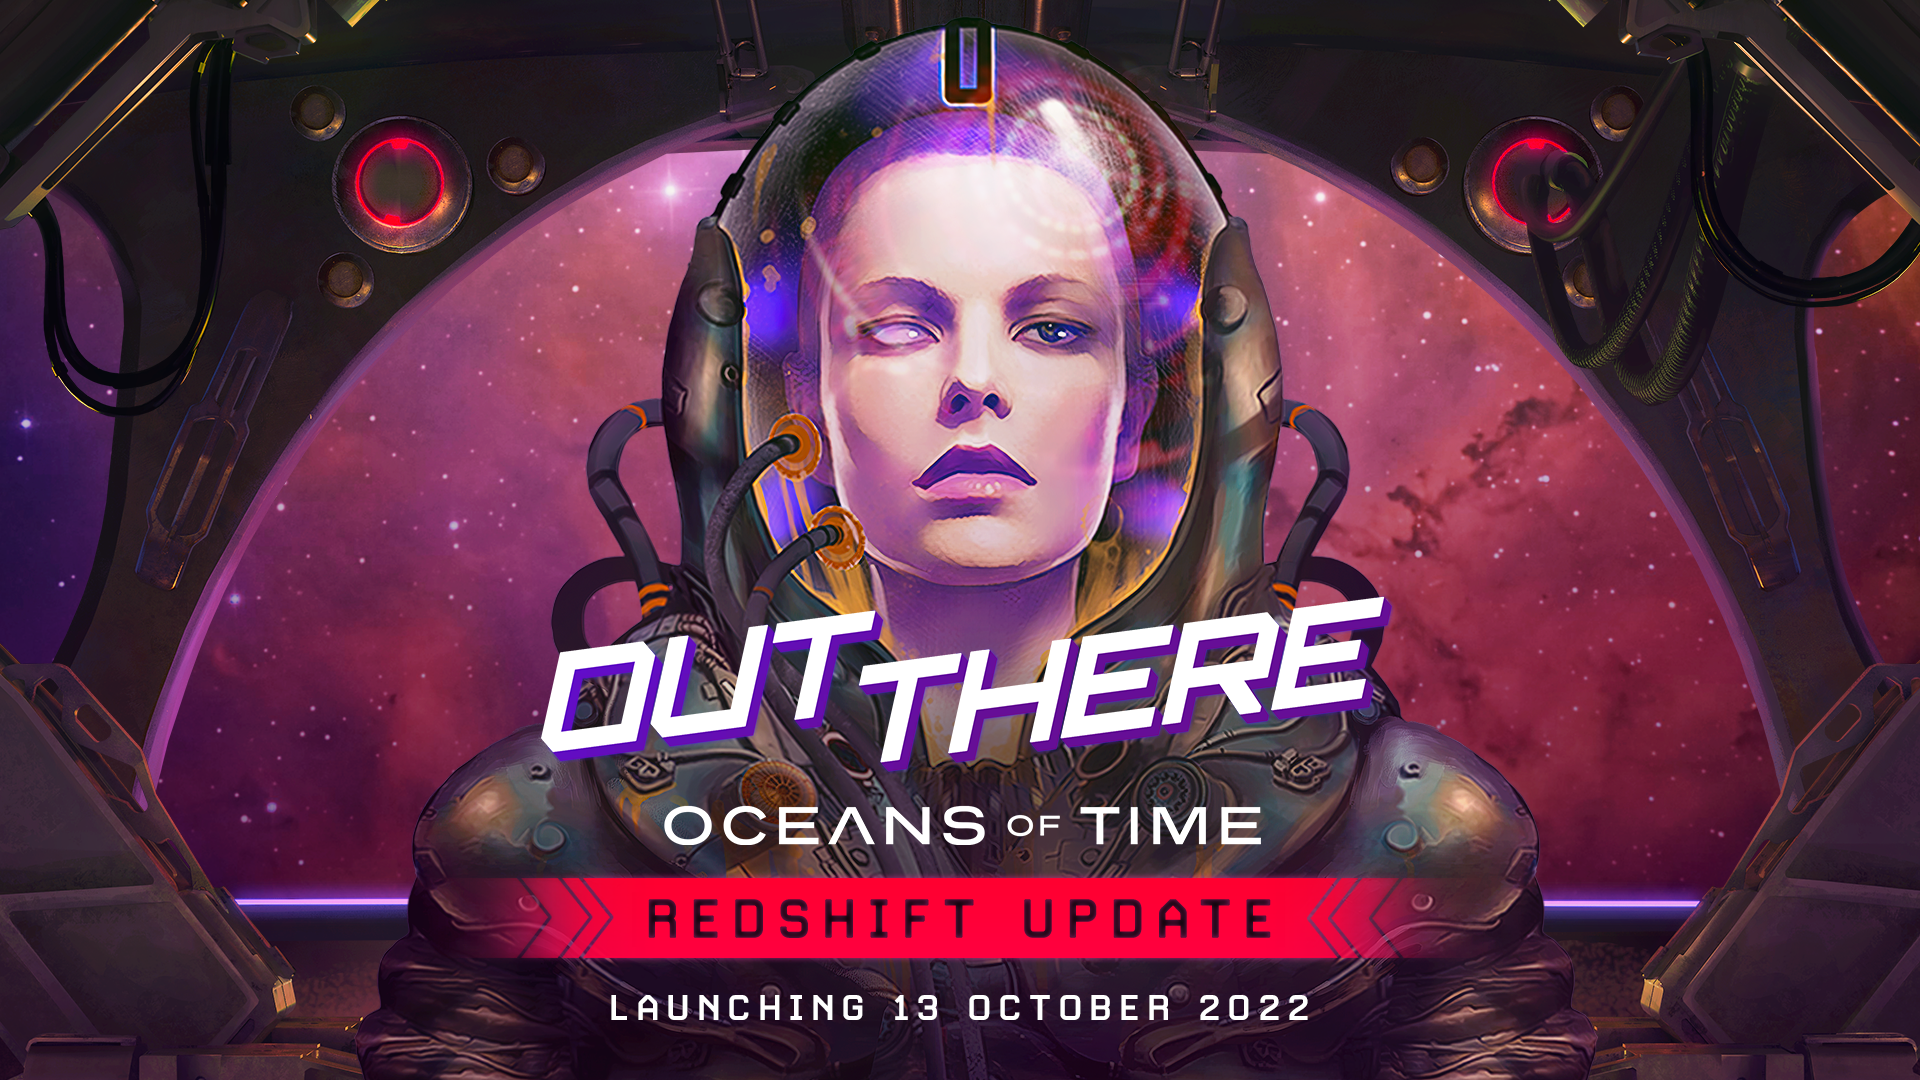 Out There Oceans Of Time Wallpapers